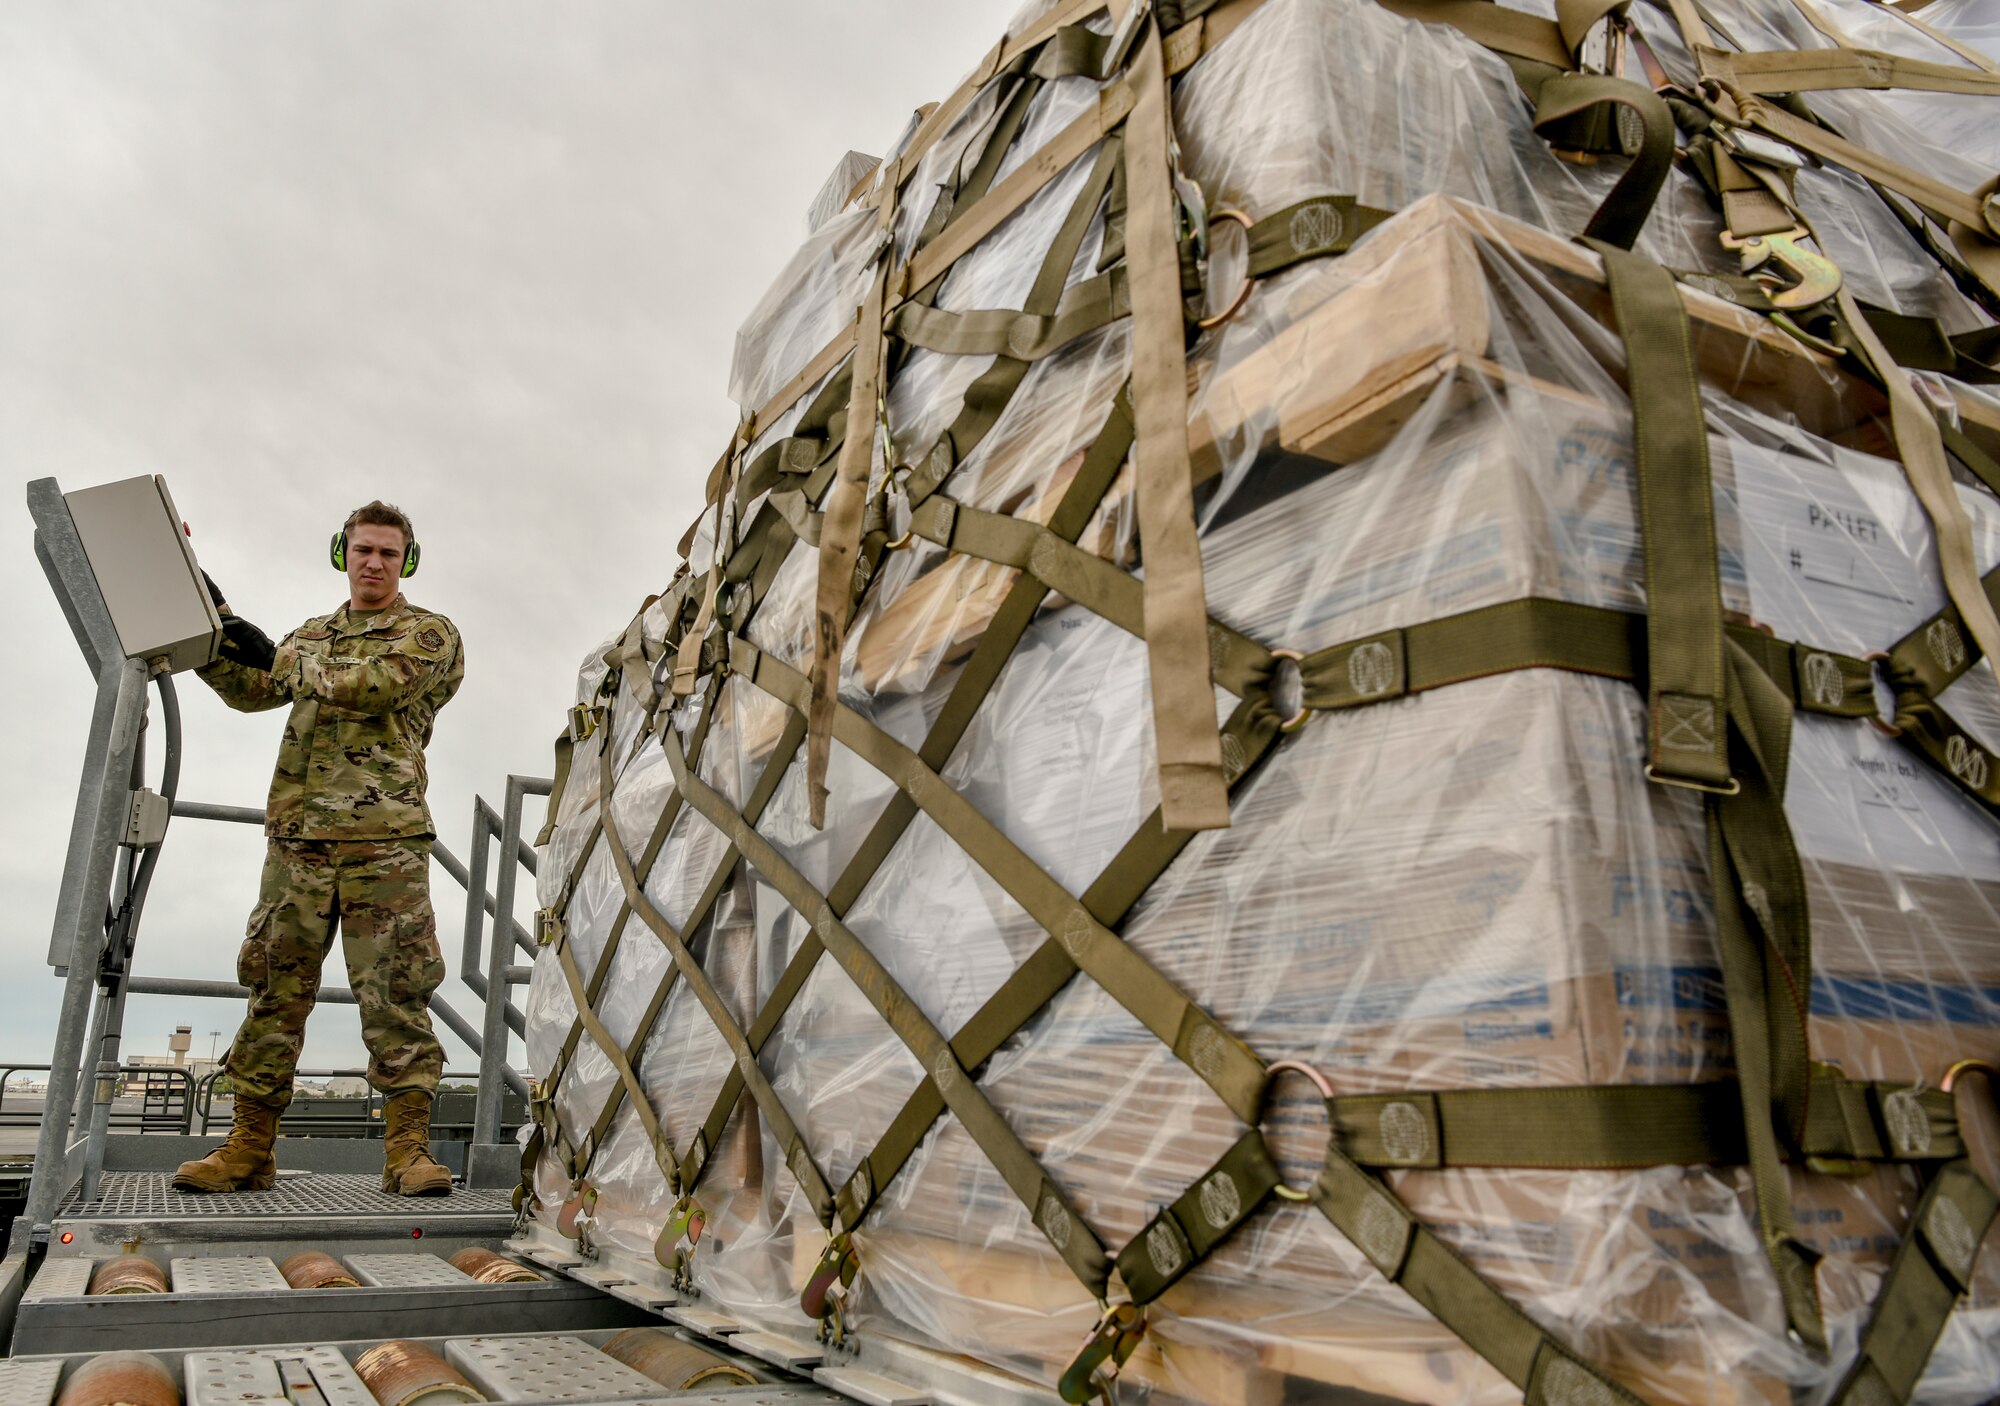 U.S. Air Force Airman Basic Brock Dowell, 735th Air Mobility Squadron air freight apprentice, monitors cargo on a conveyor belt at Joint Base Pearl Harbor-Hickam, Hawaii, March 31, 2020. The 735th AMS ensures incoming aircraft are mission-capable and can leave with cargo and personnel in a timely fashion. (U.S. Air Force photo by Tech. Sgt. Anthony Nelson Jr.)